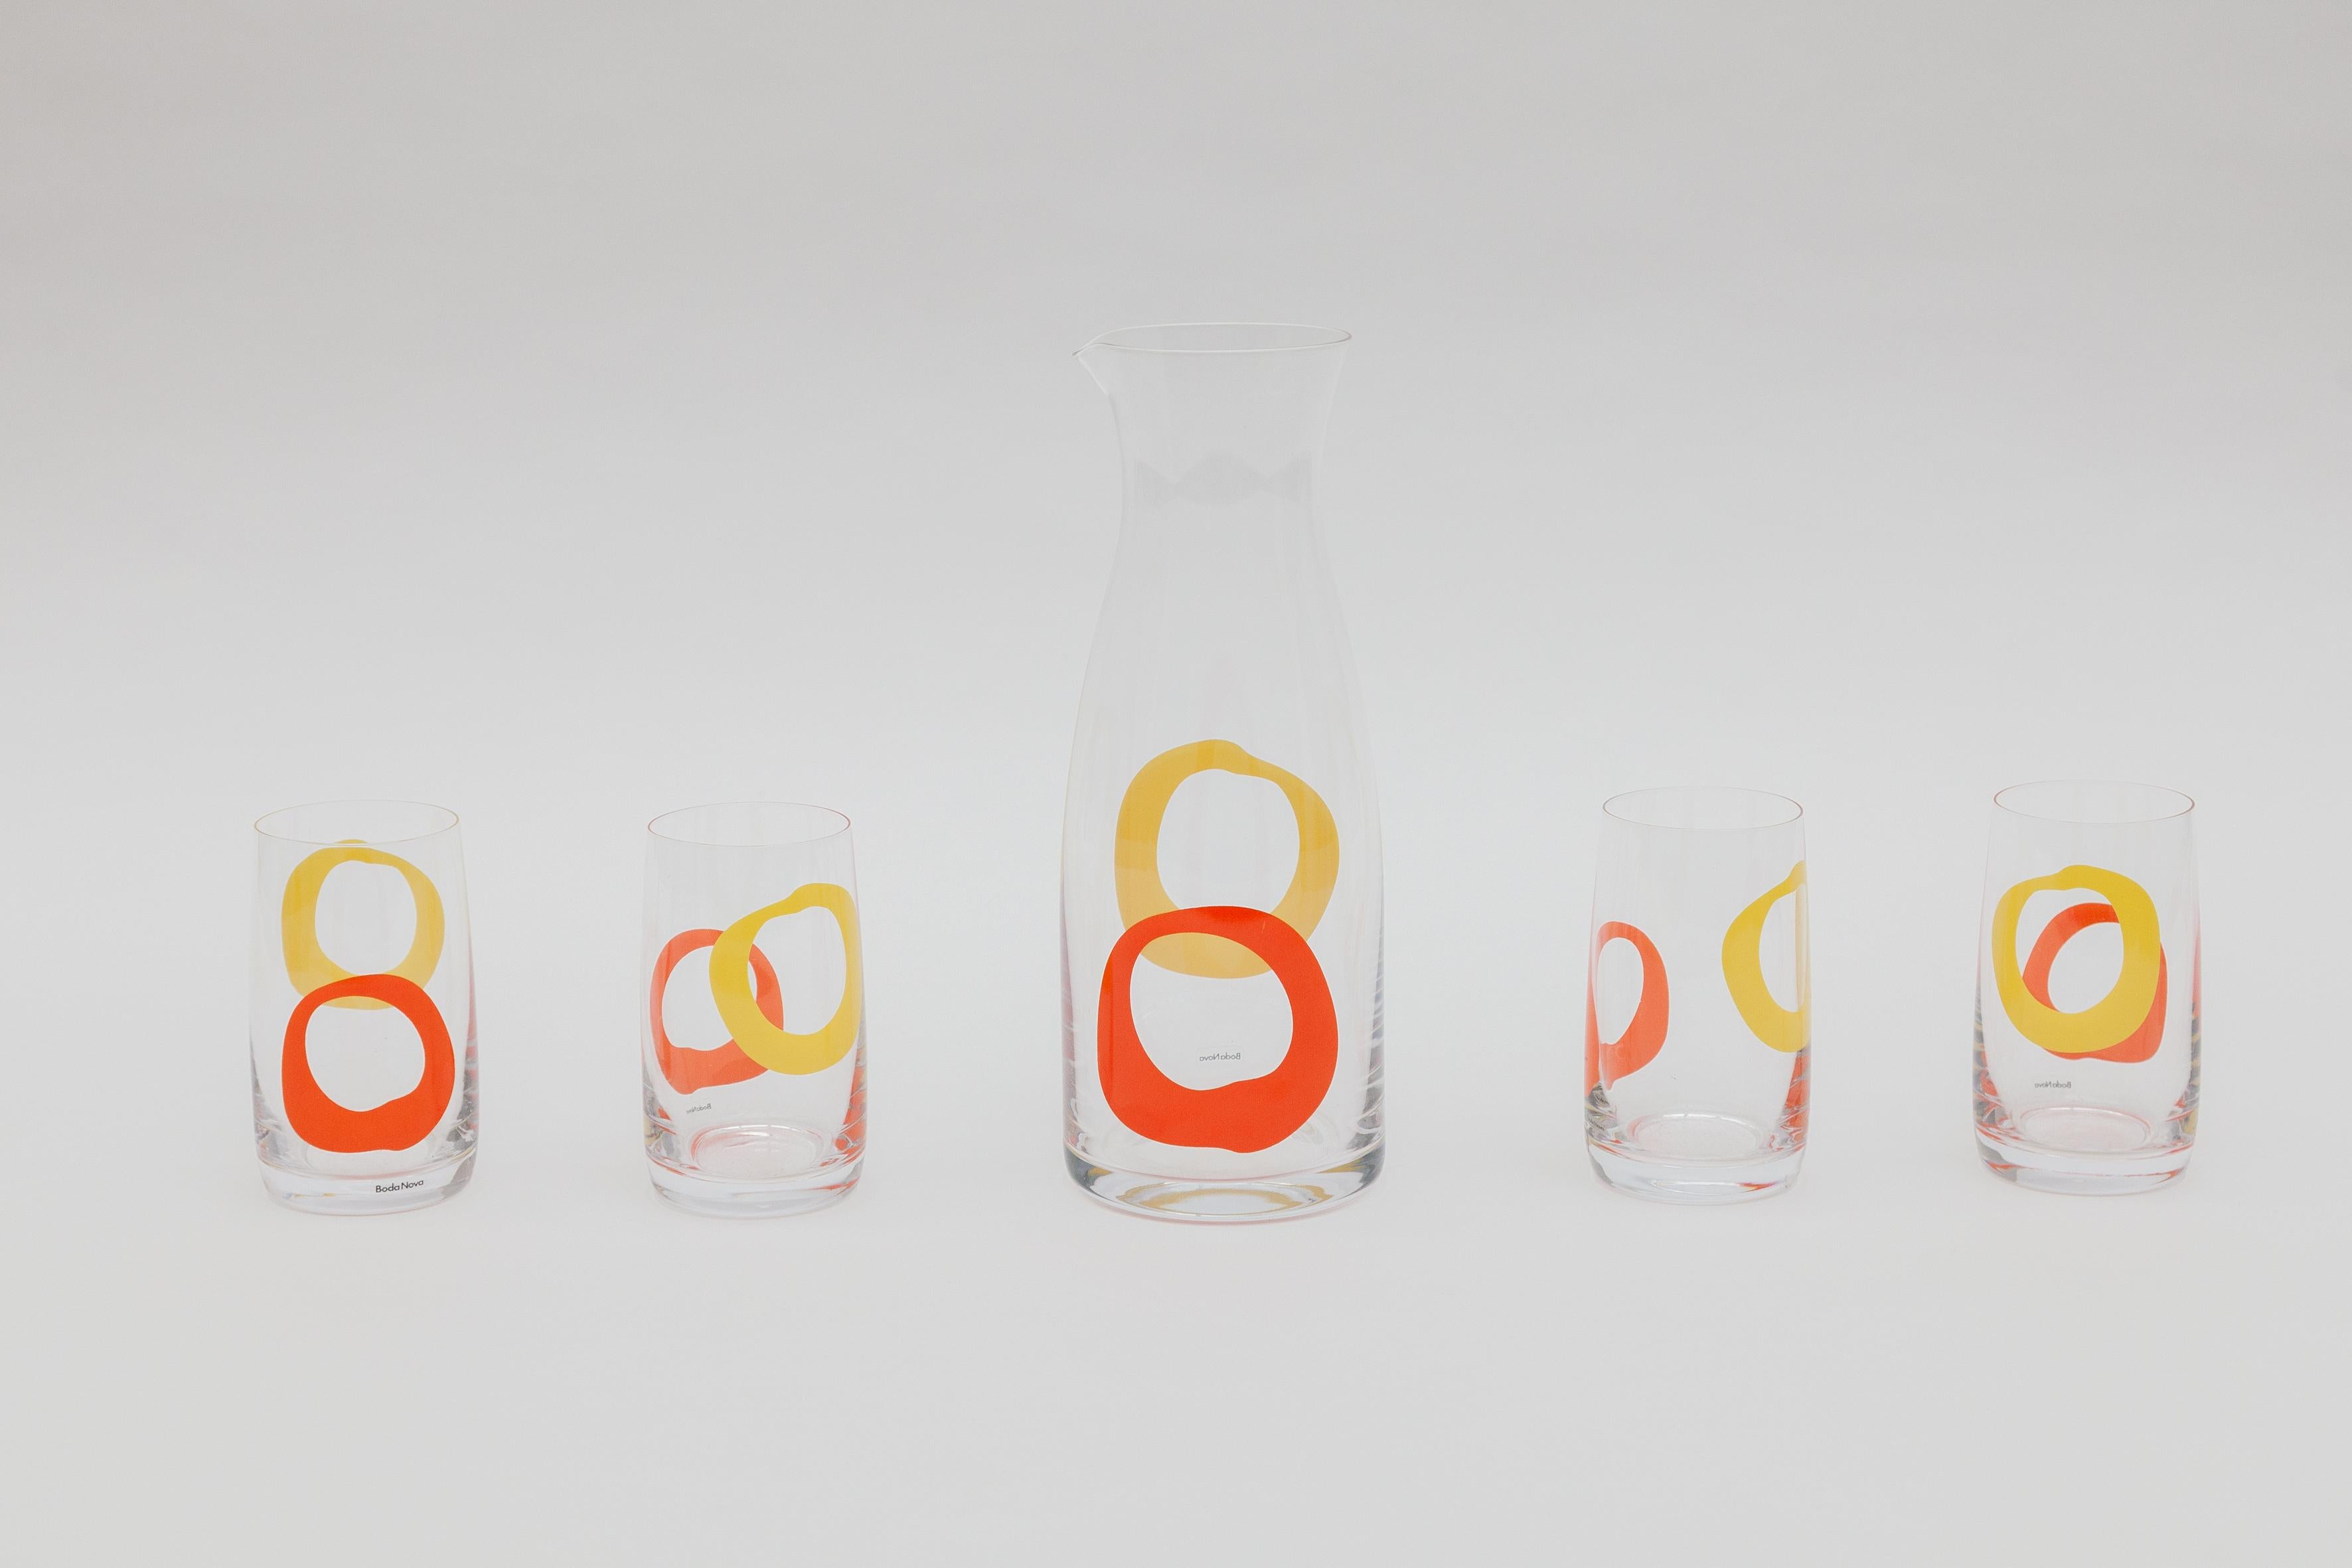 The Boda Nova carafe and four matches longdrinks. The design of the carafe is based on the gentle lines of the tumbler in yellow and orange the carafe narrows at its top to form a neck that is easy to grasp and is equally suited to serving fruit